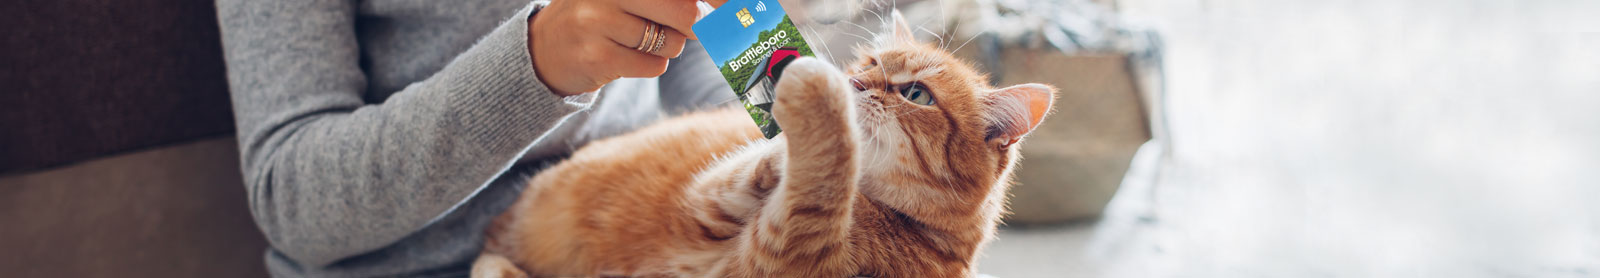 Cropped photo of cat in woman's lap, cat is holding a BS&L debit card in it's paw